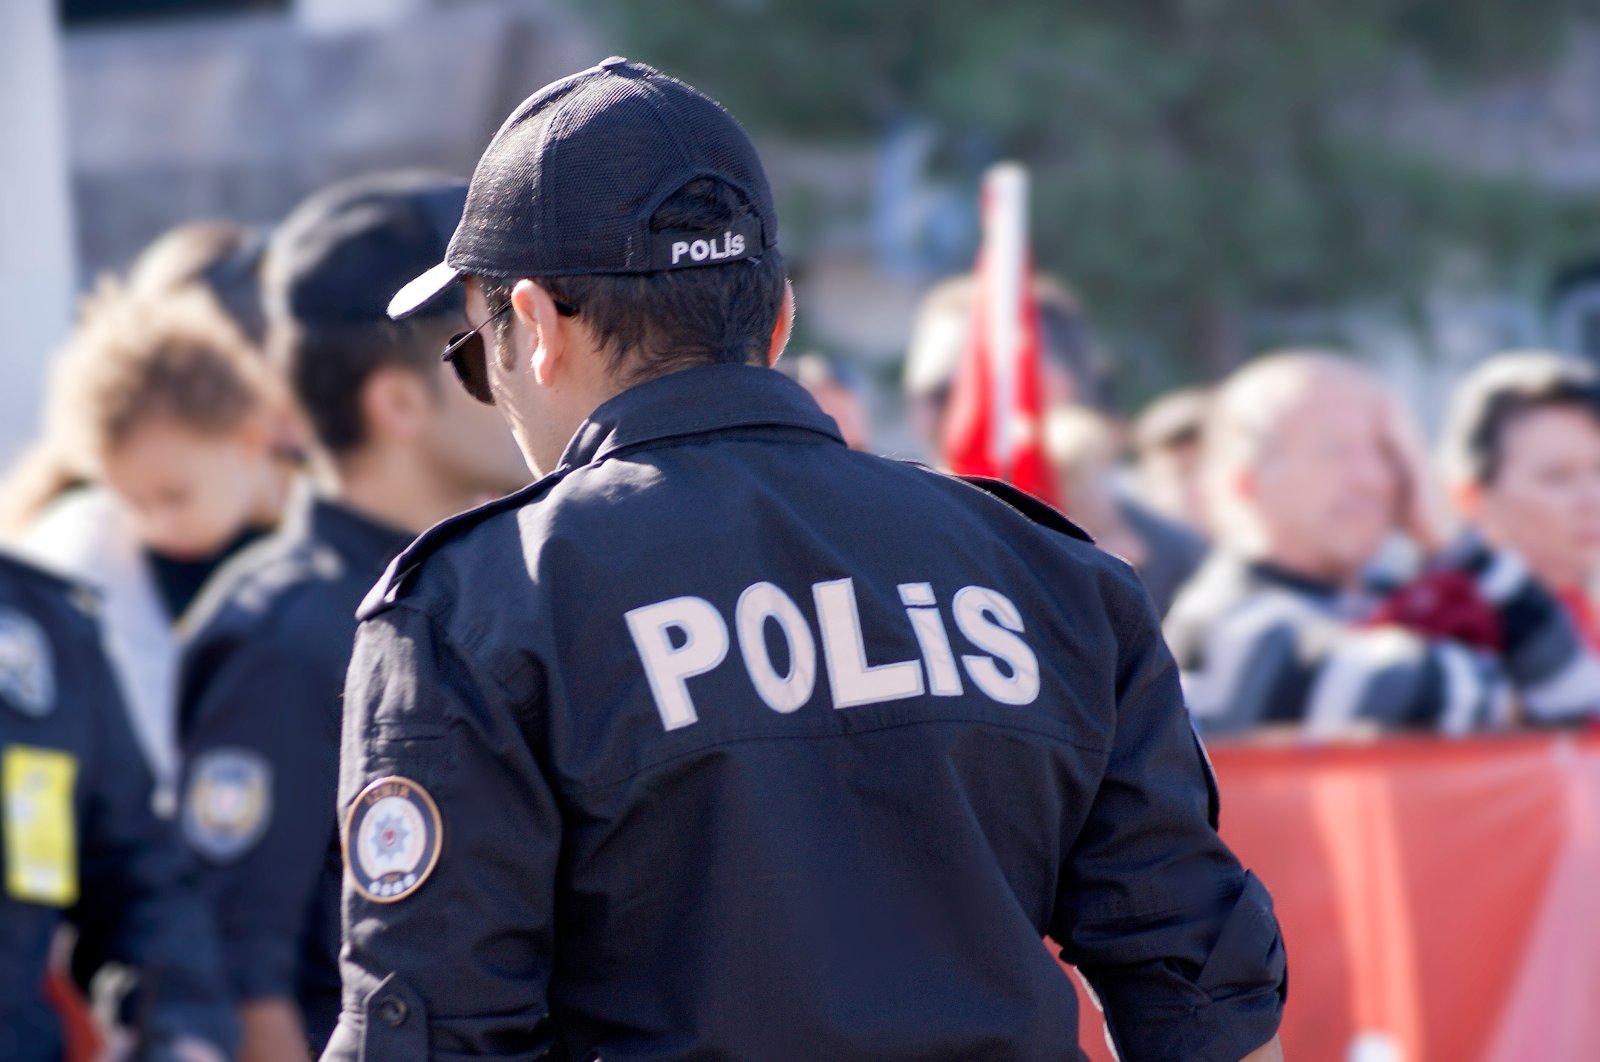 A Turkish Police officer on duty at an unspecified location in this undated file photo. (Shutterstock File Photo)